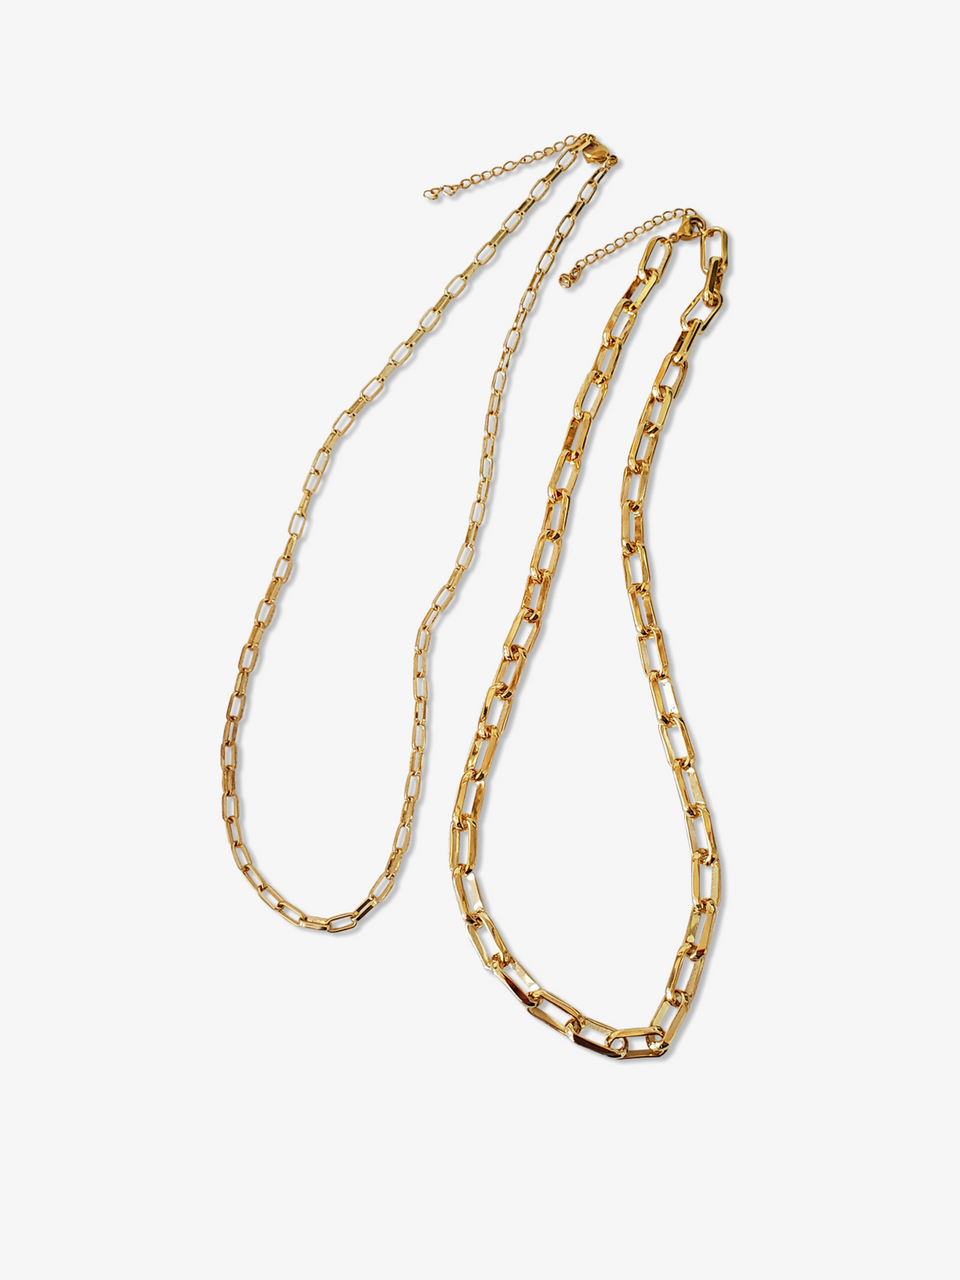 LOCK & SQUARE PENDANT CHAIN-LINK STATEMENT GOLD-TONED LAYERED NECKLACE